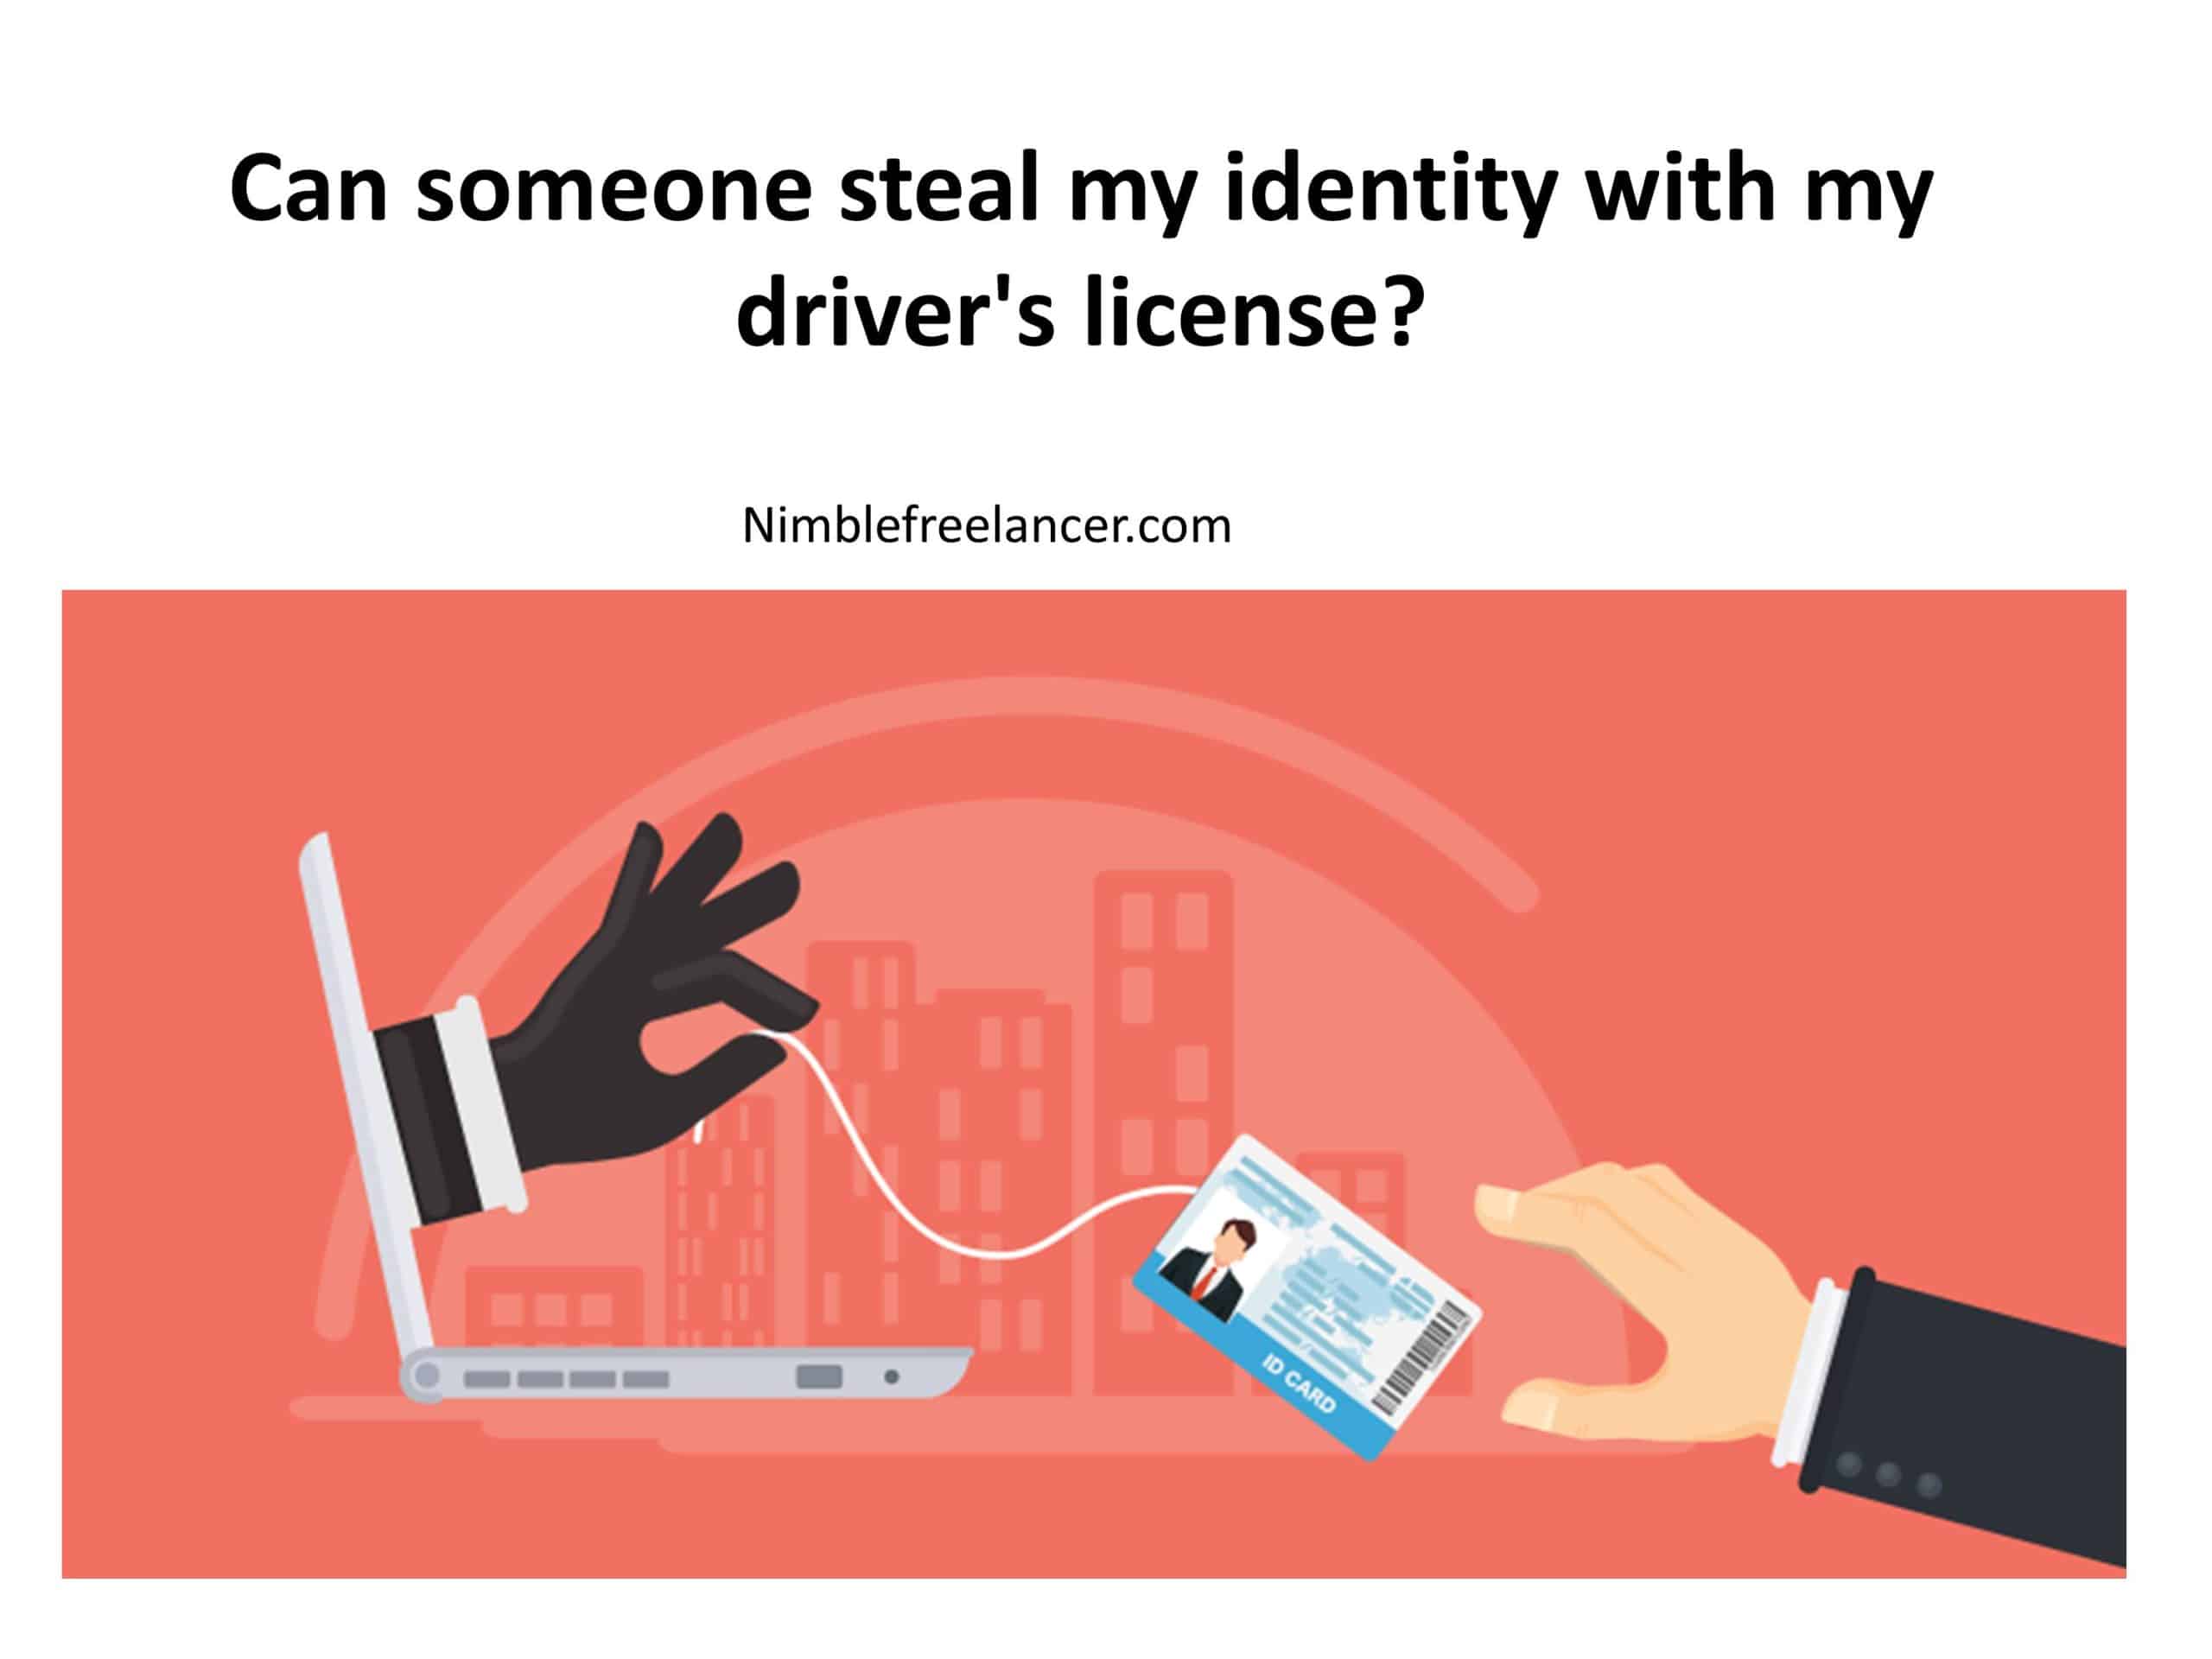 Can someone steal my identity with my driver's license